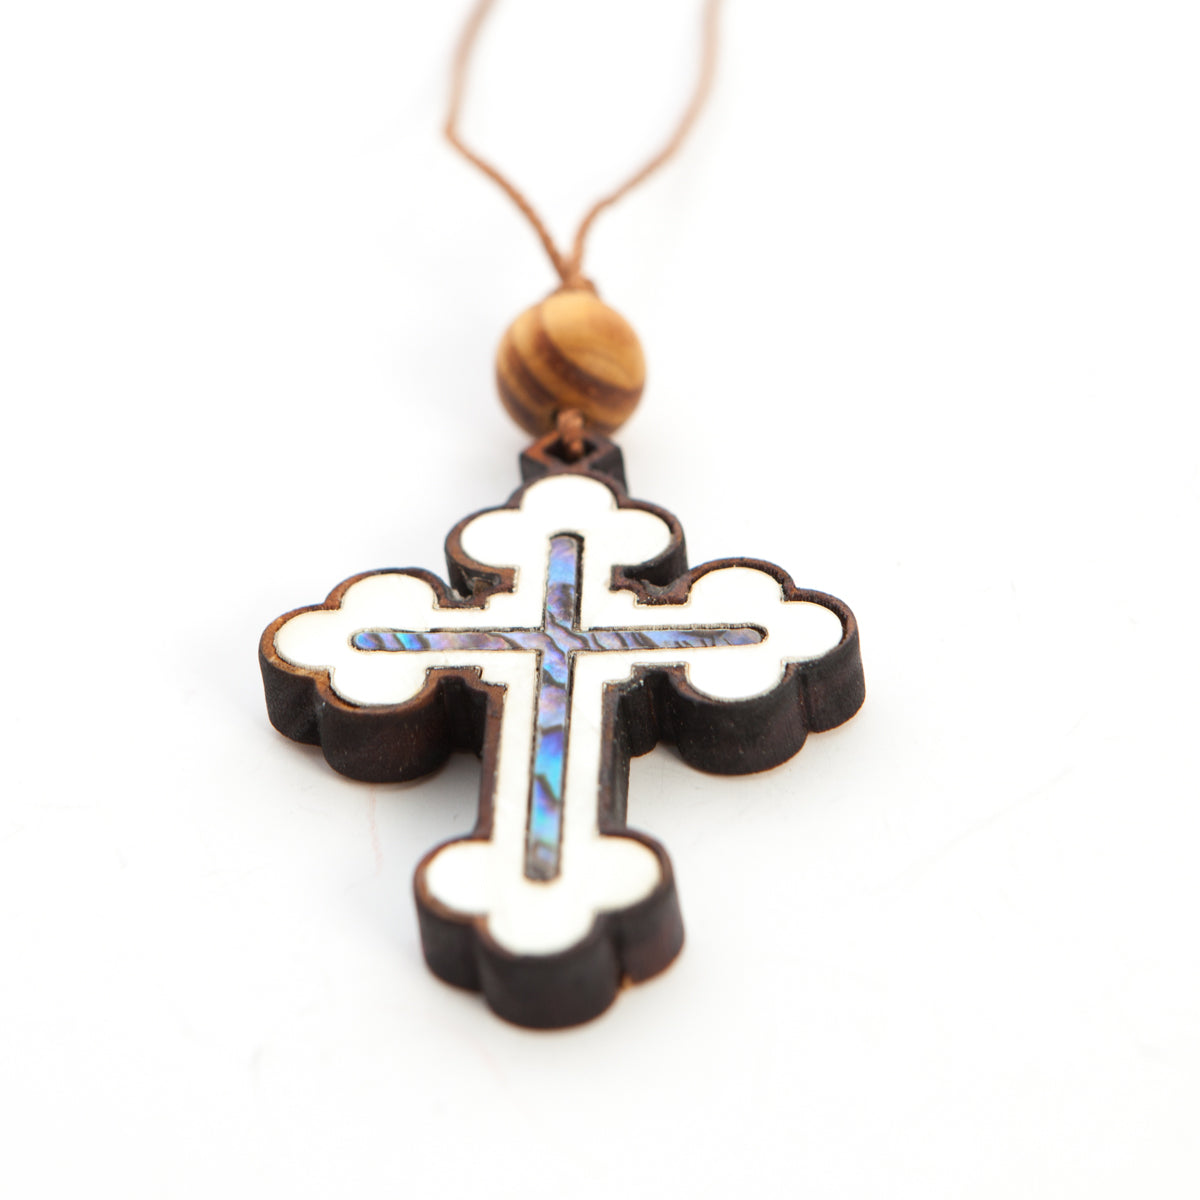 Budded Cross Necklace with a Bead (Olive Wood and Colorful Mother of Pearl)